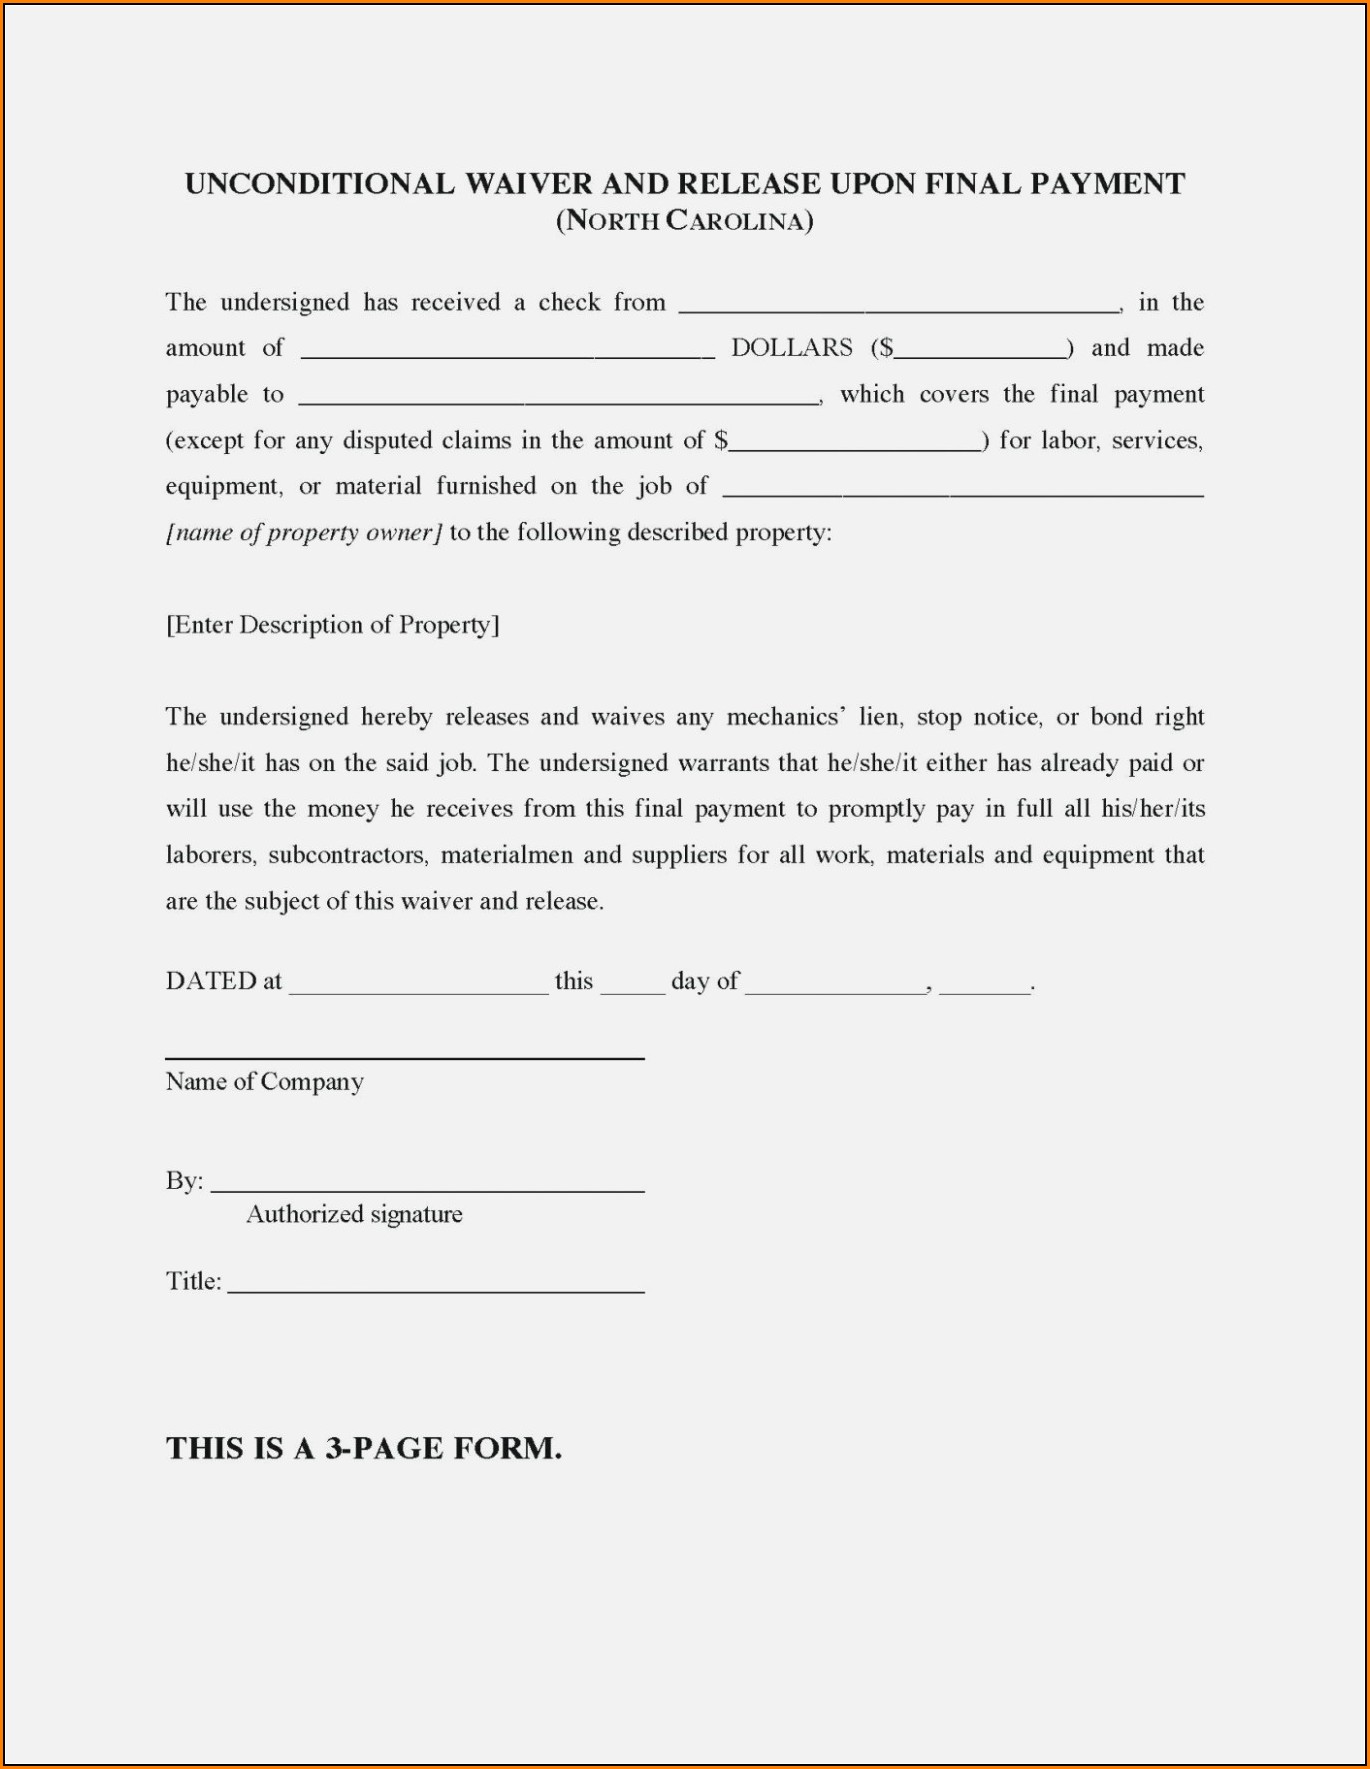 lien-waiver-form-with-notary-form-resume-examples-0g2755gypr